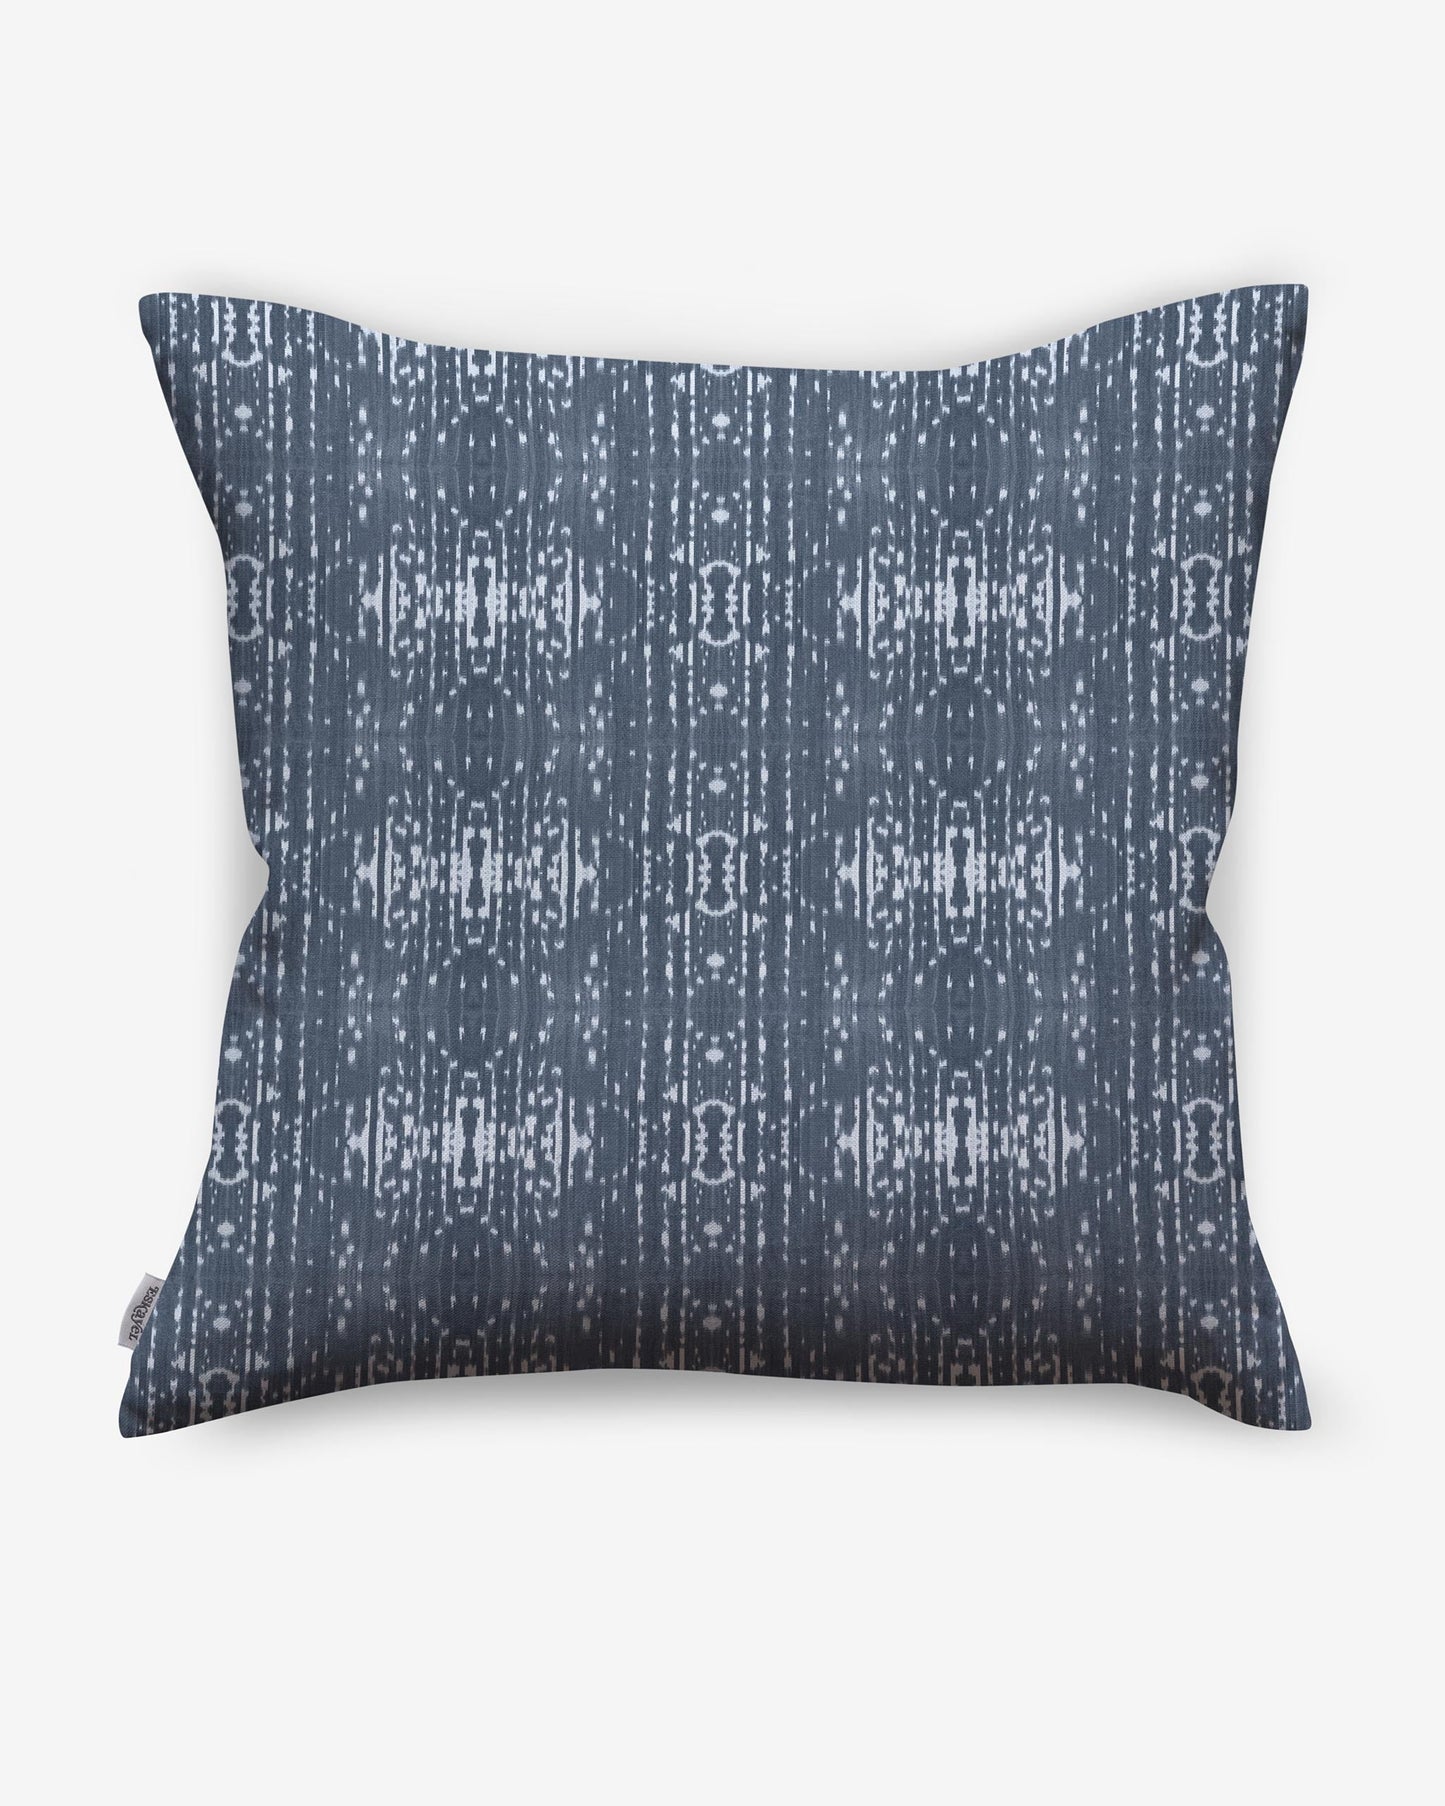 A pillow with a blue and white Indigo Ikat pattern